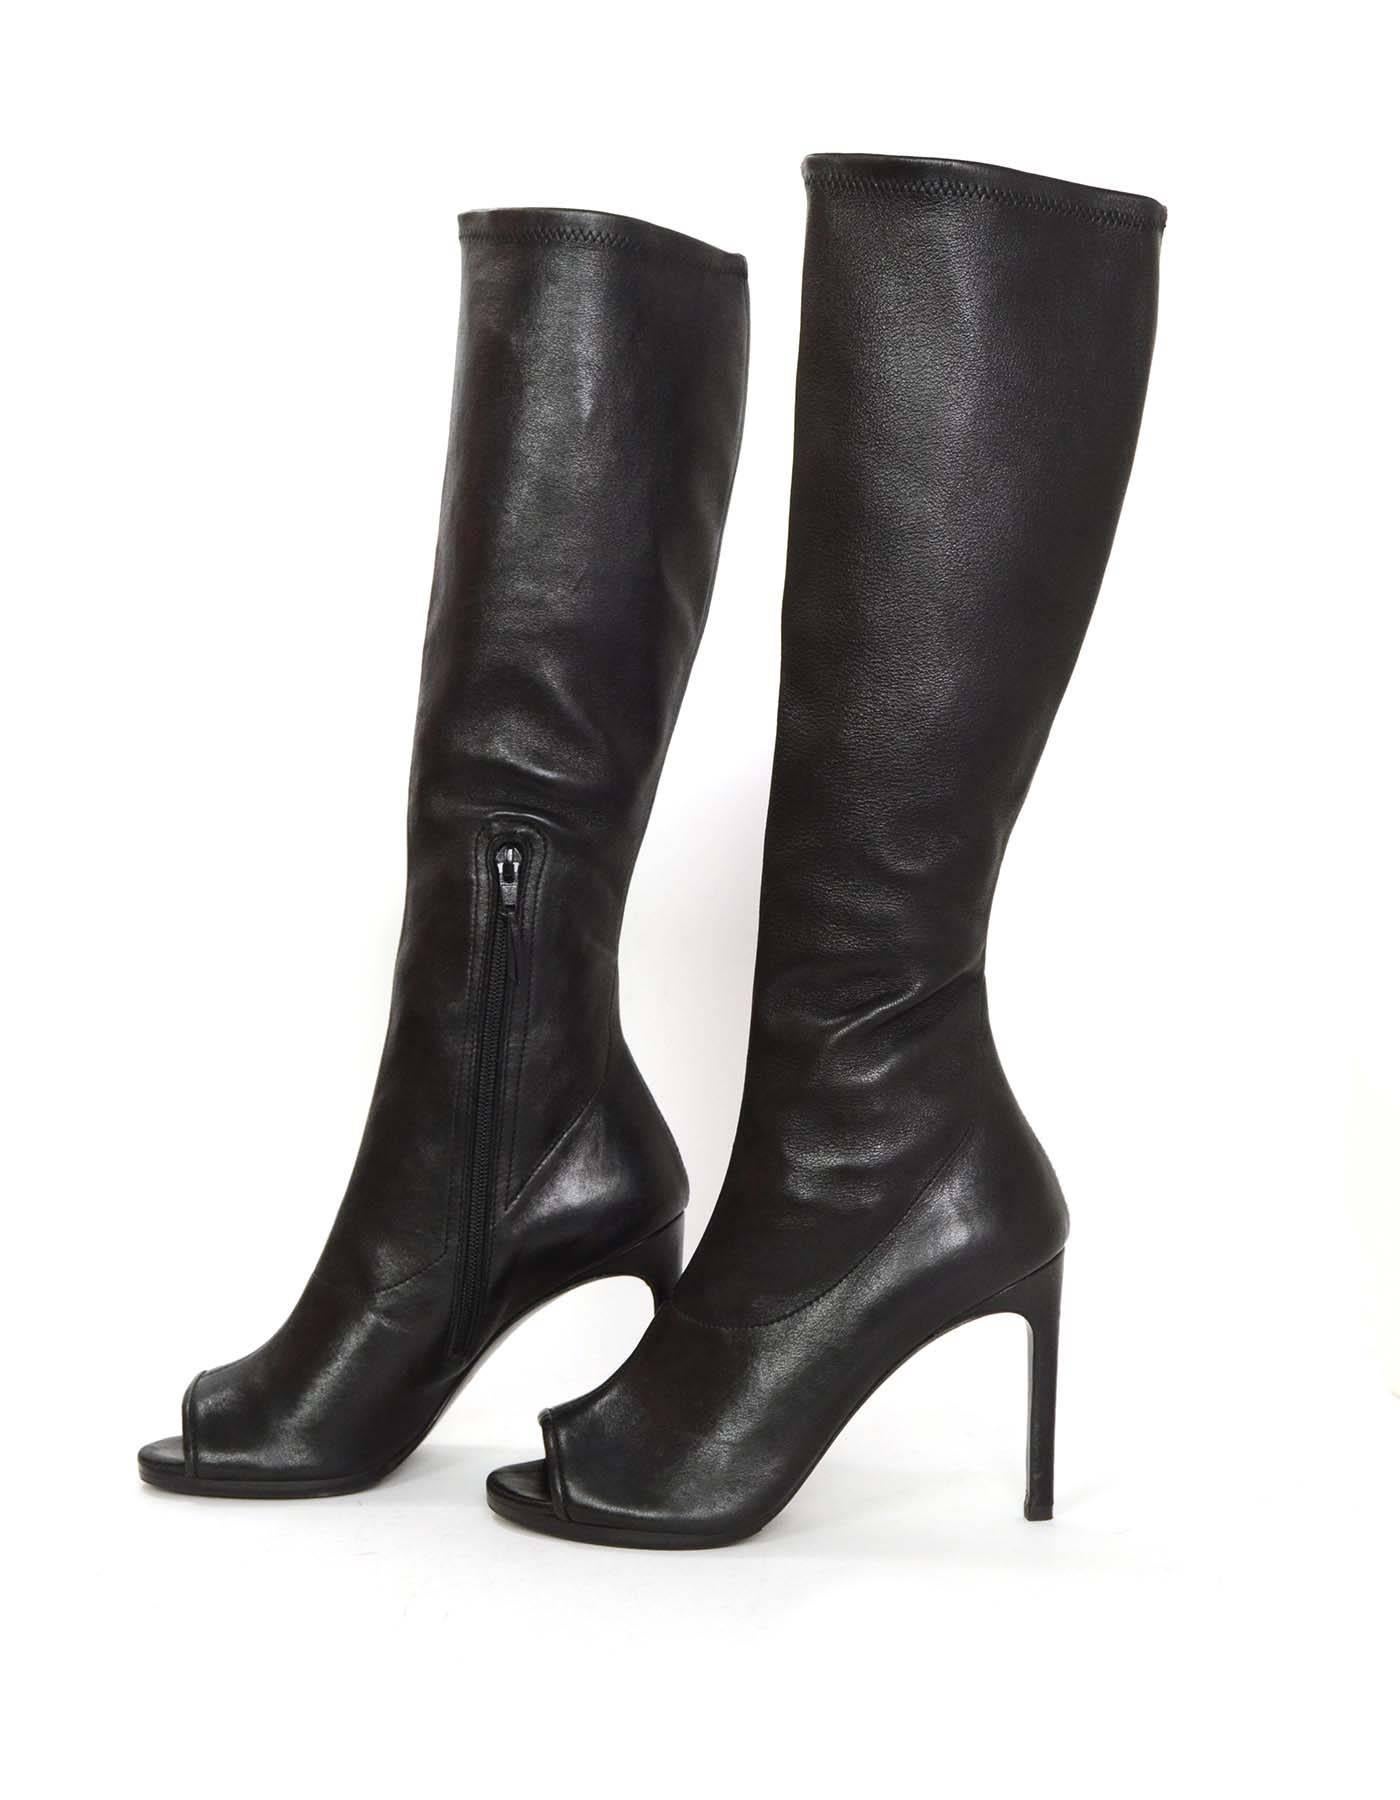 Stuart Weitzman Black Leather Peep-Toe Boots
Made In: Spain
Color: Black
Materials: Leather
Closure/Opening: Pull on with inside ankle zipper half way up
Sole Stamp: Stuart Weitzman Leather Sole Made in Spain
Overall Condition: Excellent